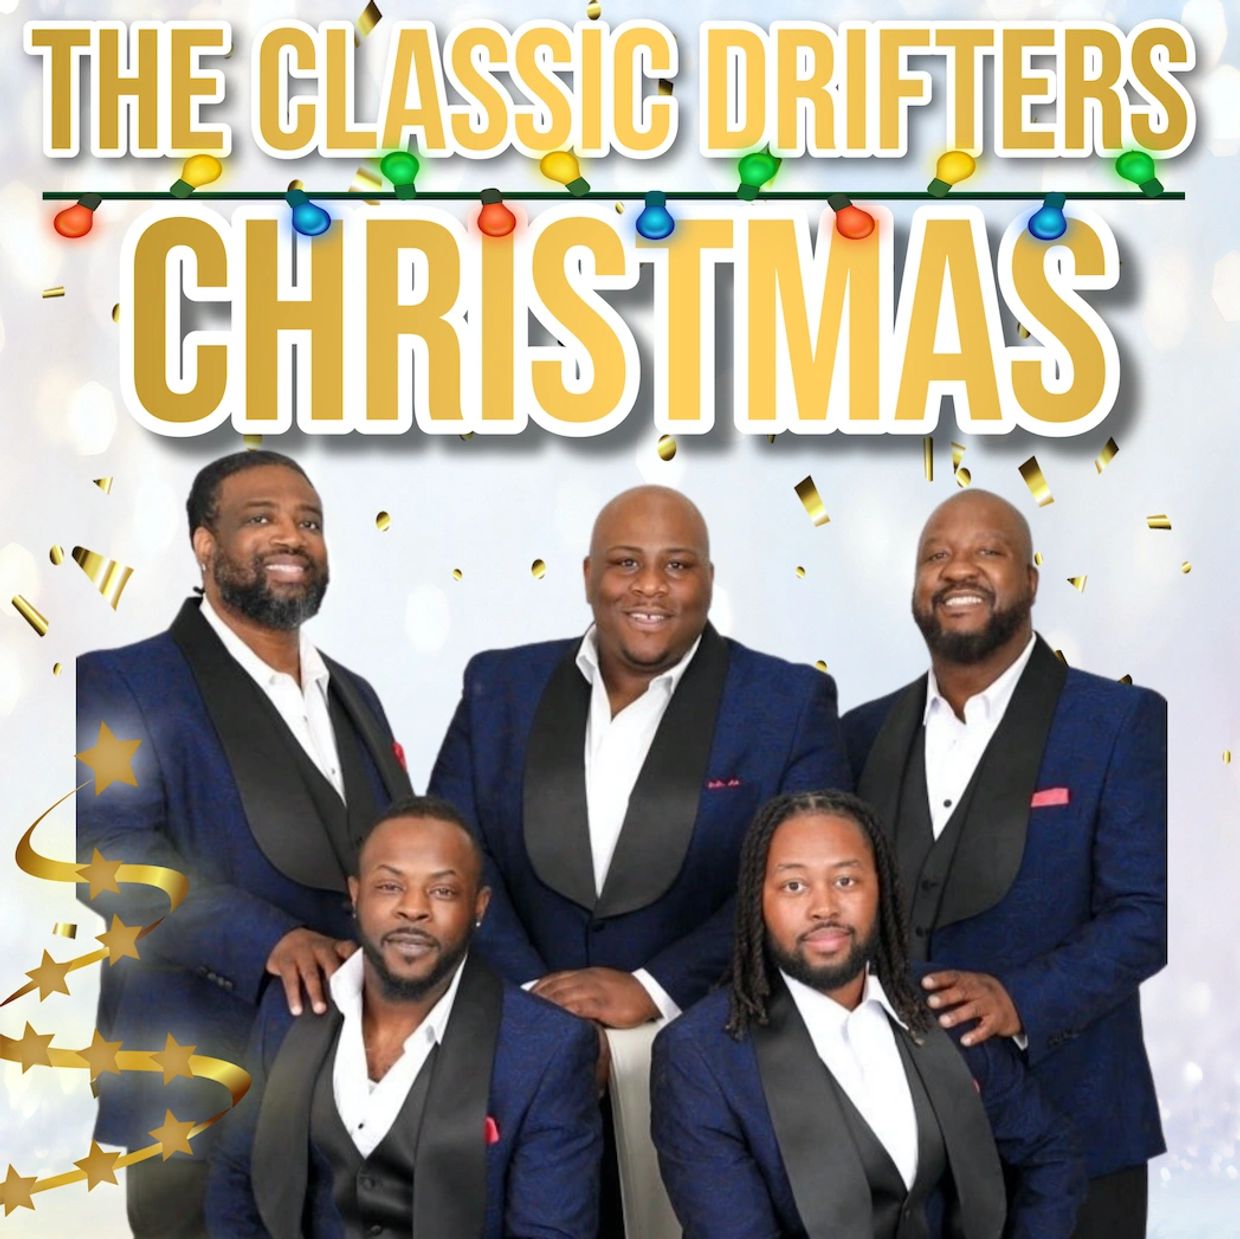 The Drifters — The Vista Center for the Arts